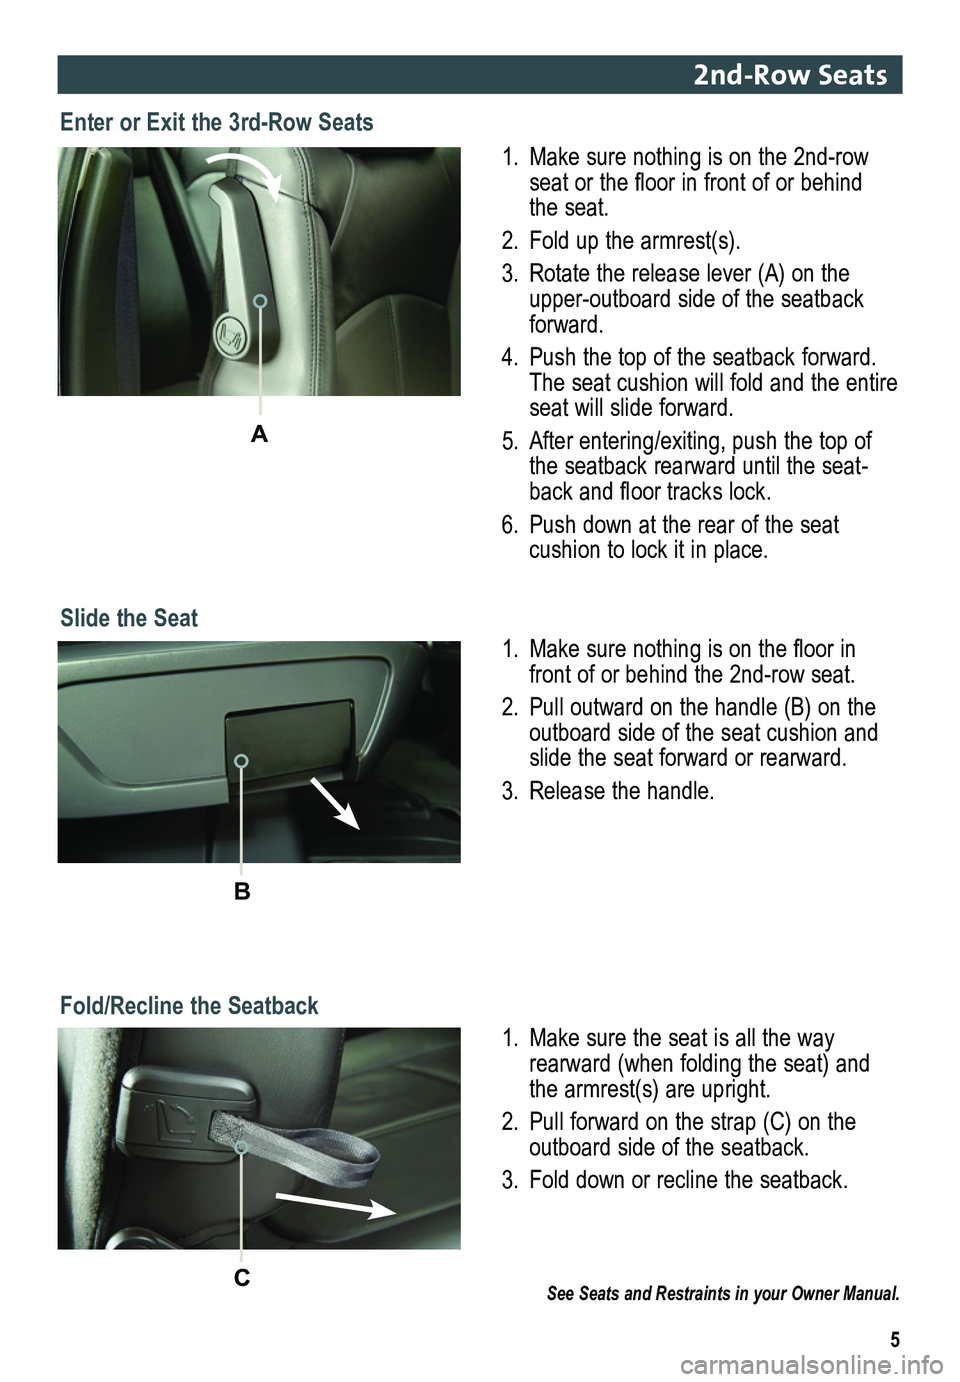 GMC ACADIA 2013  Get To Know Guide 5
2nd-Row Seats 
Slide the Seat
1. Make sure nothing is on the 2nd-row seat or the floor in front of or behind the seat.
2. Fold up the armrest(s).
3. Rotate the release lever (A) on the upper-outboar